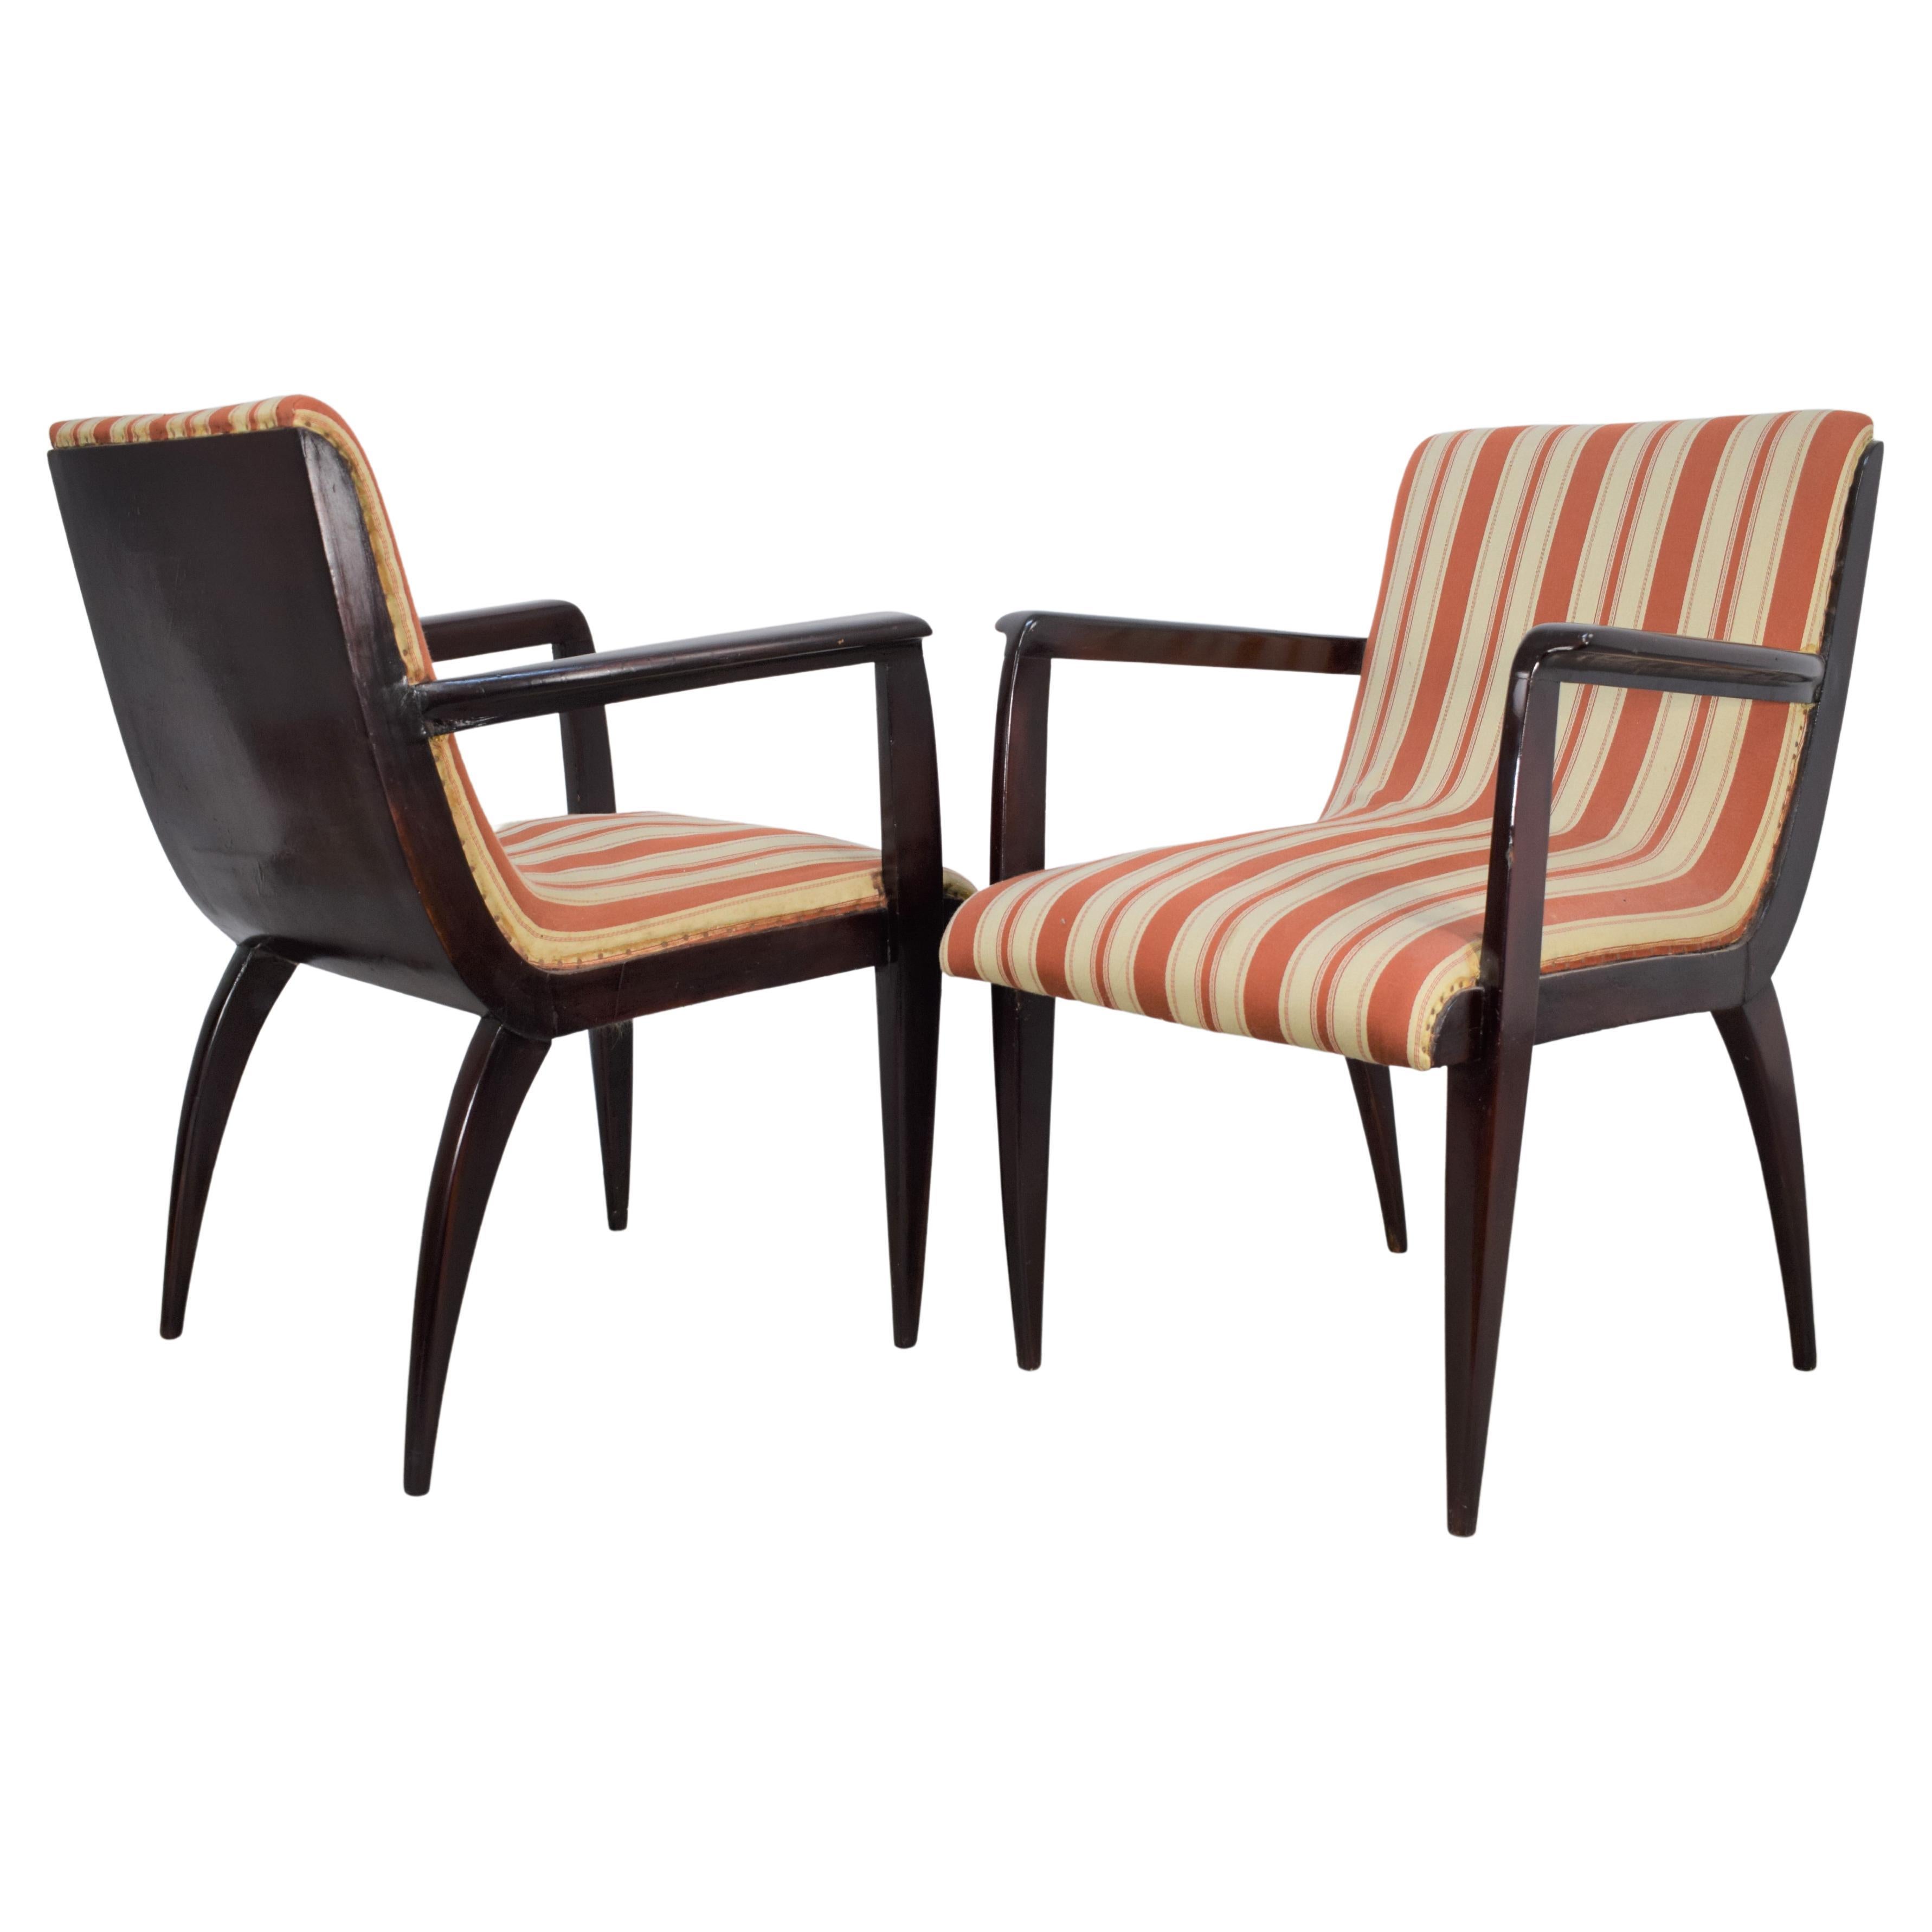 Pair of Italian Armchairs Attributed to Guglielmo Ulrich, 1950s For Sale